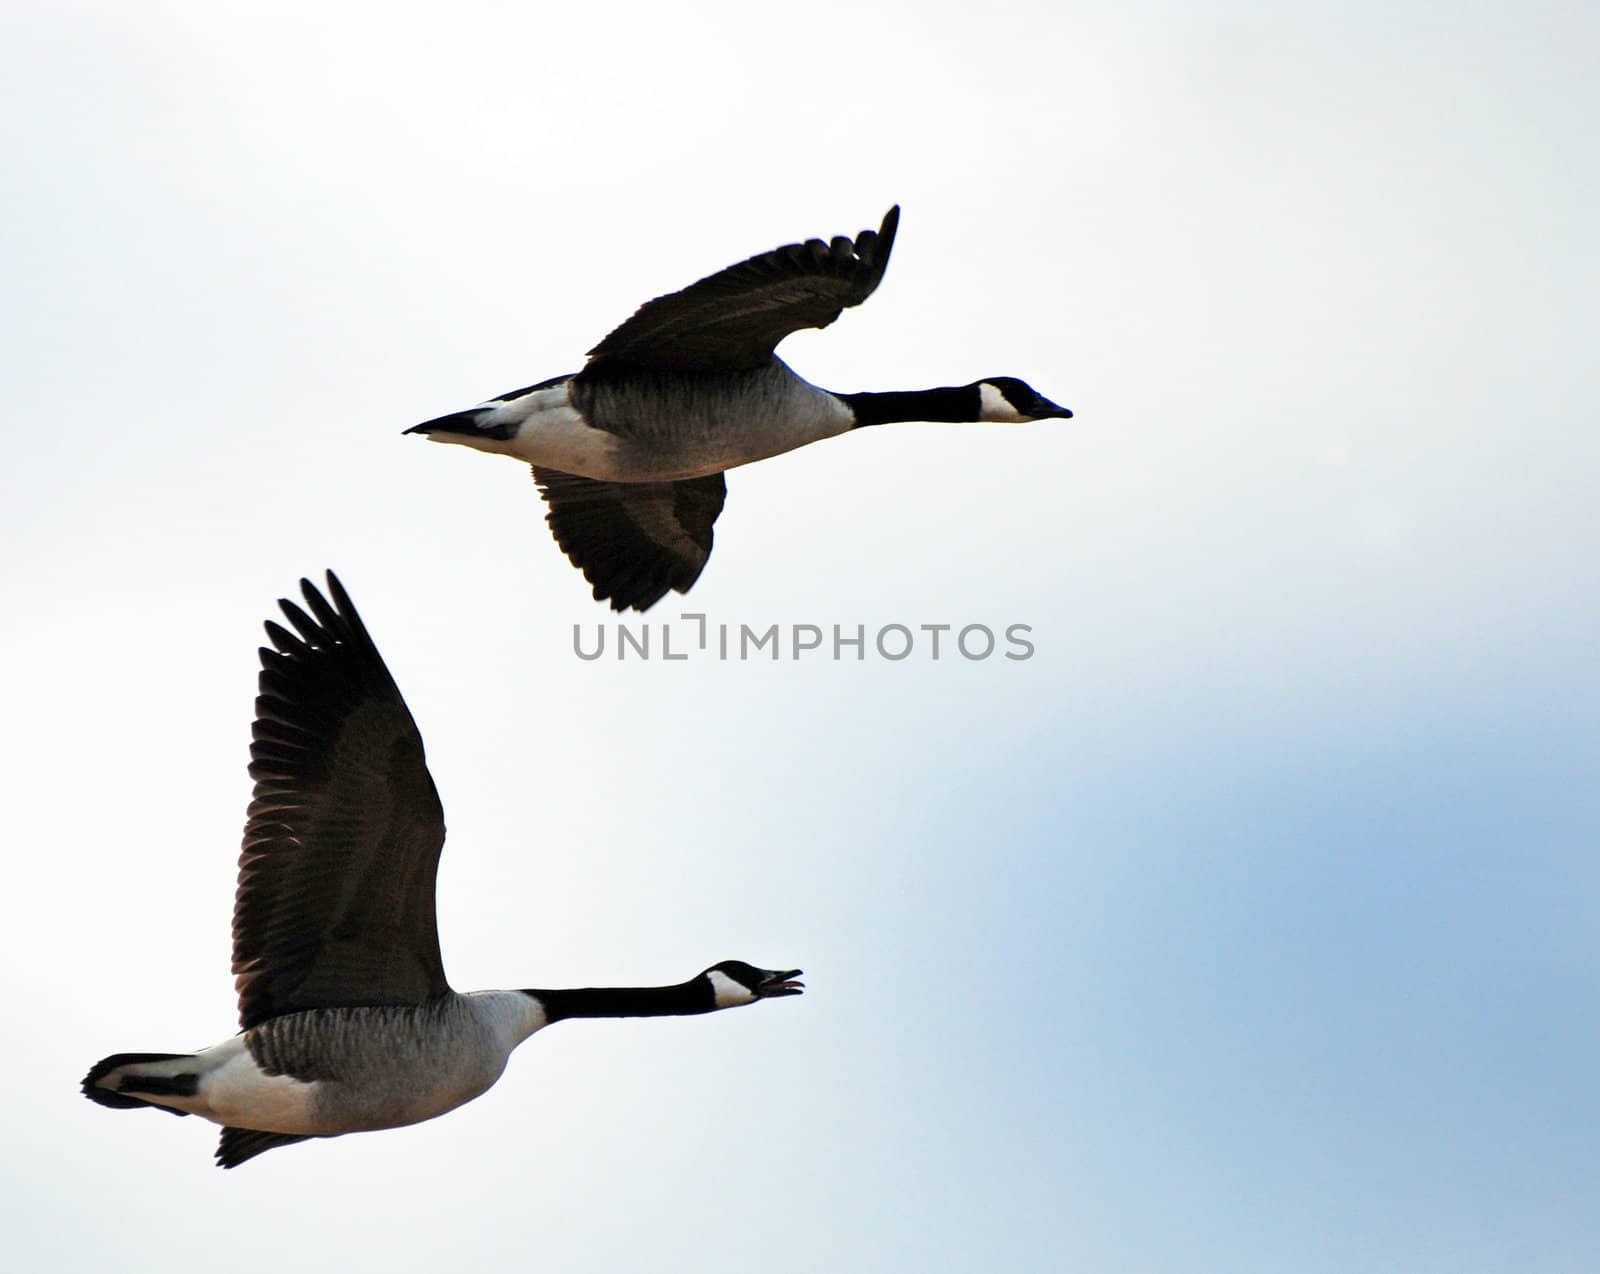 Canada geese are flying together in a pod